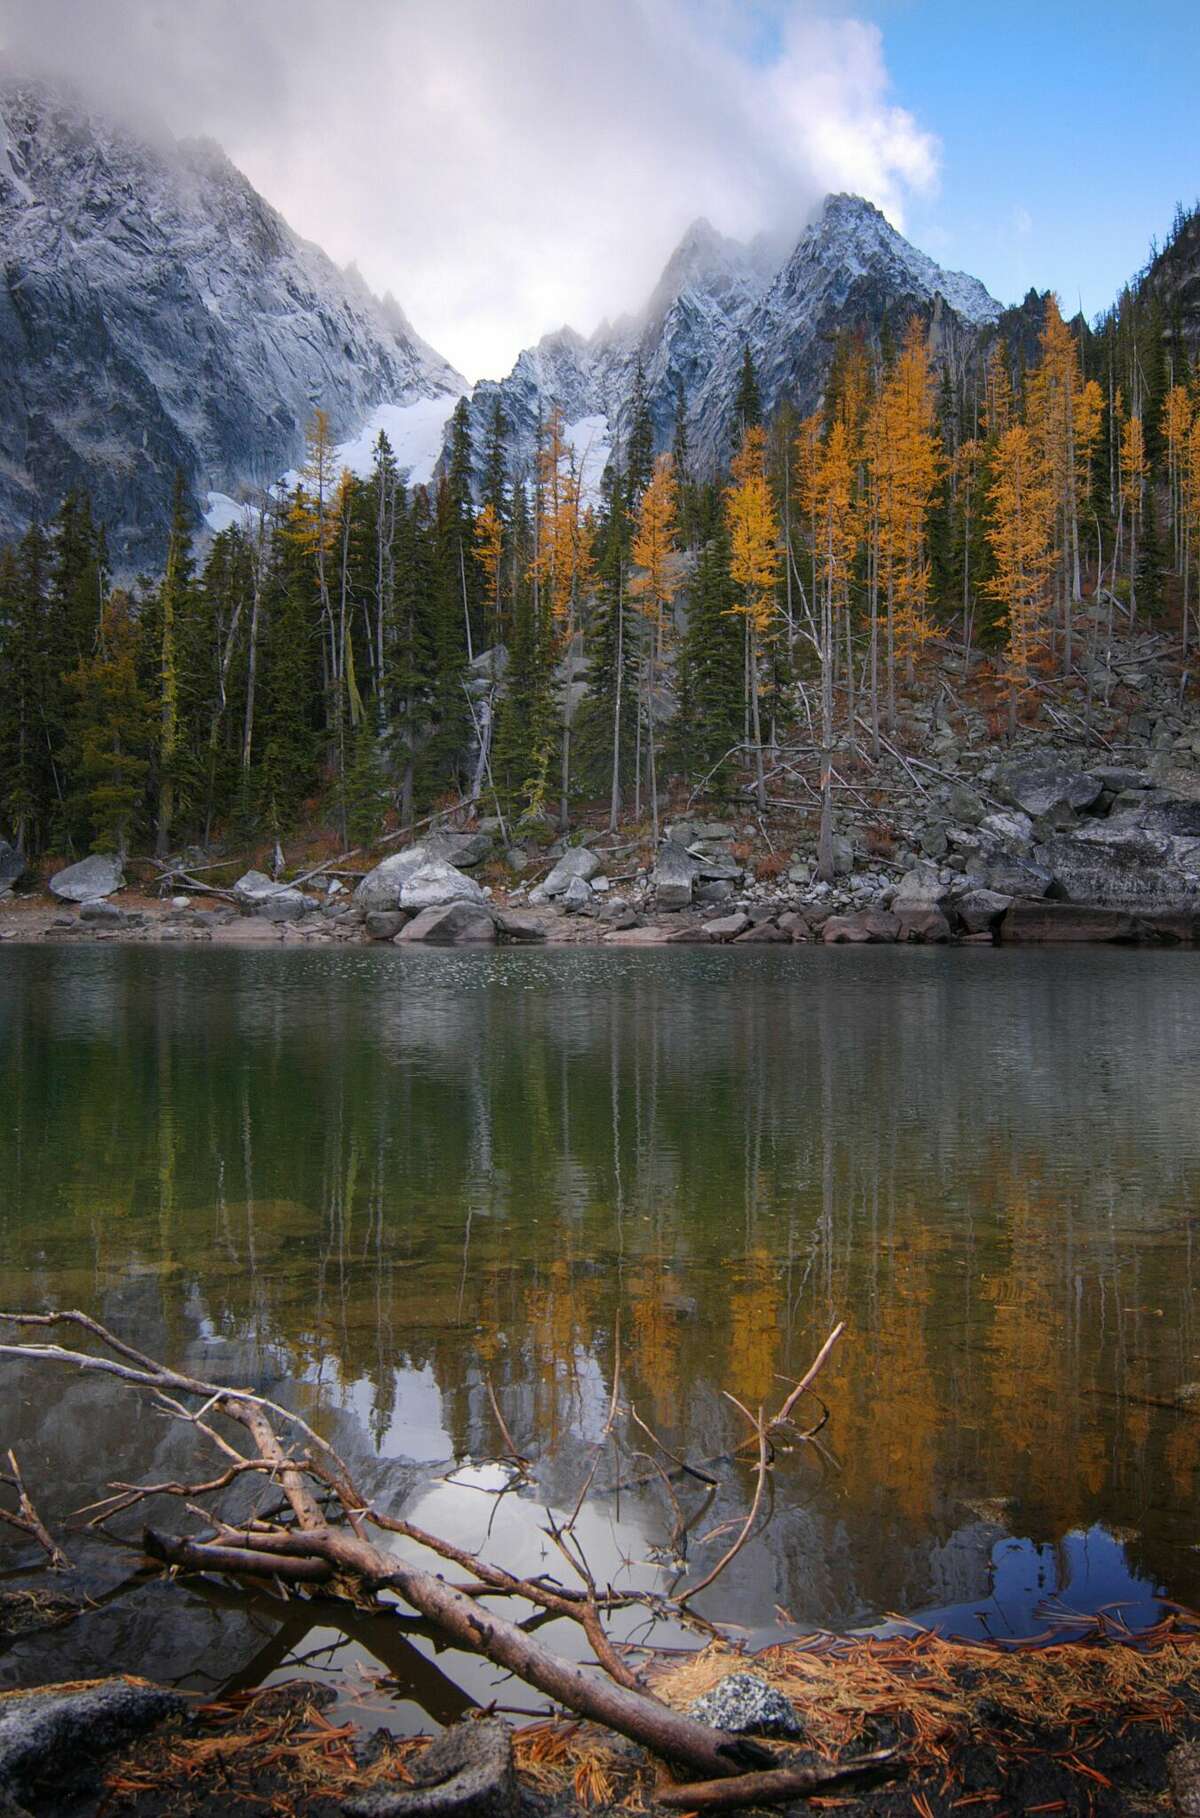 FILE PHOTO: A reflection of Colchuch Peak in Colchuck Lake near The Enchantment Lakes wilderness in Washington. A 53-year-old Connecticut man was among three climbers killed Sunday in an avalanche in central Washington, officials said.